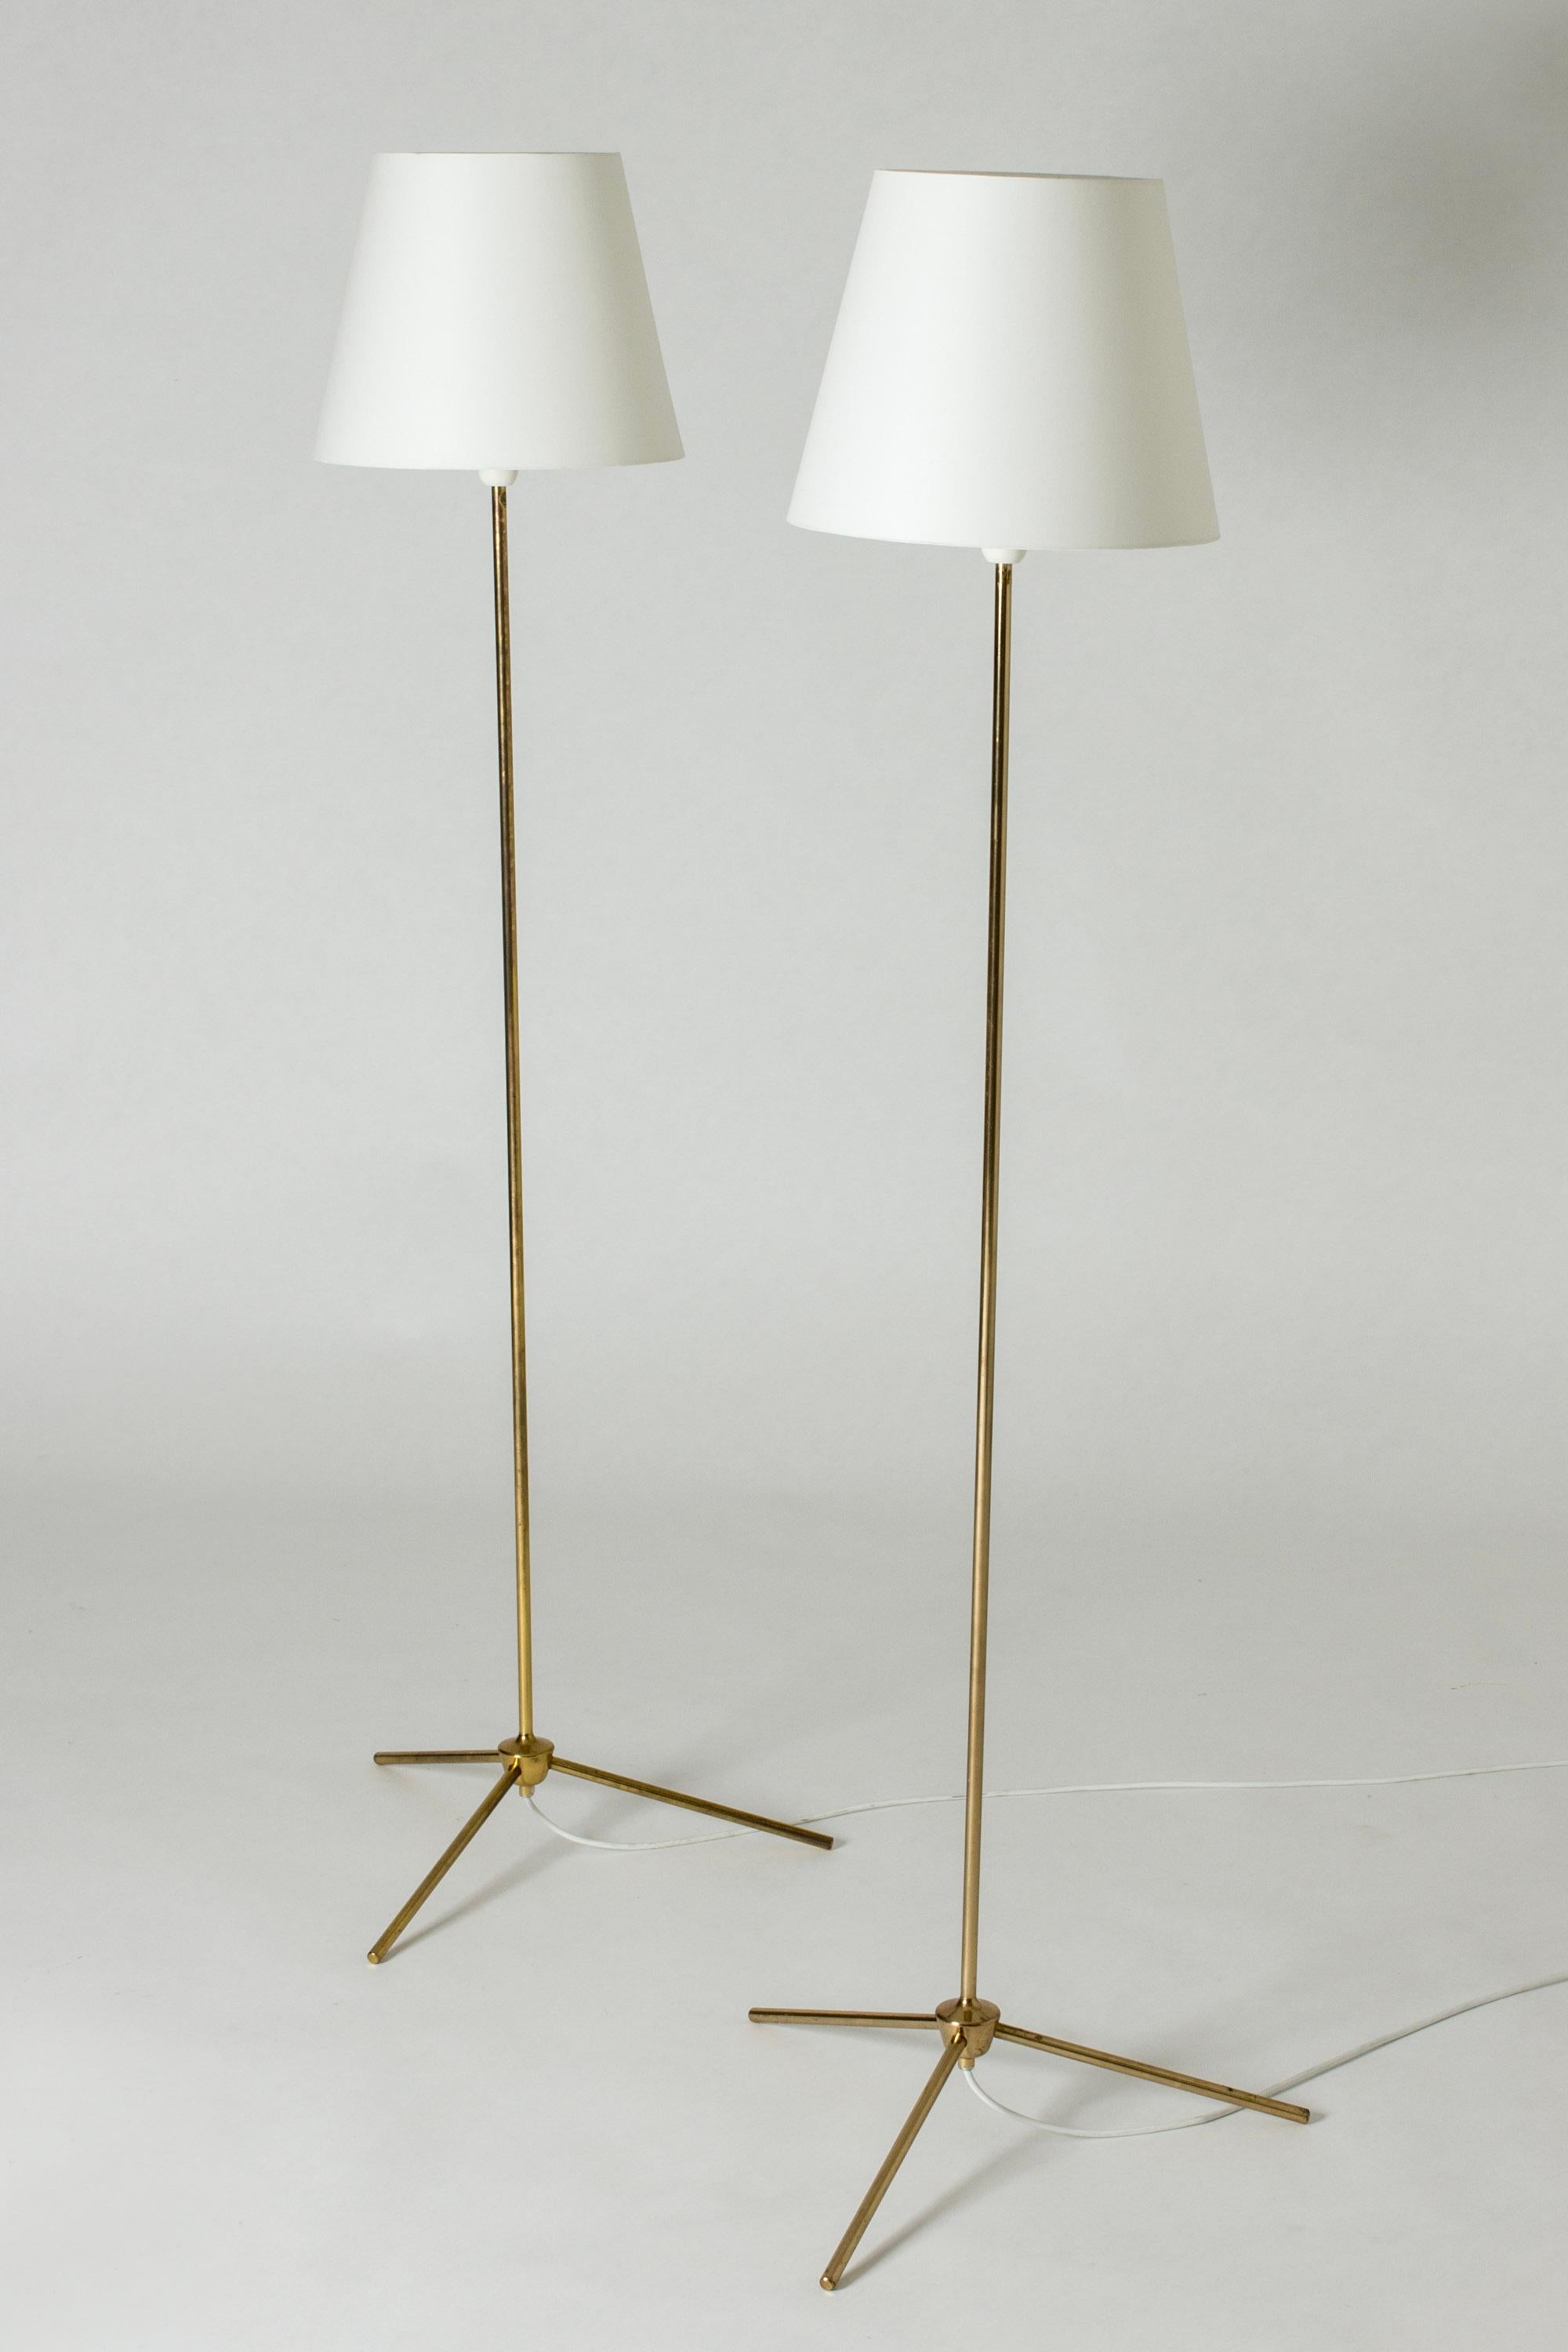 Pair of rare floor lamps from Bergboms. Made with slender brass stems and tripod bases with a chunky decorative detail in the center.